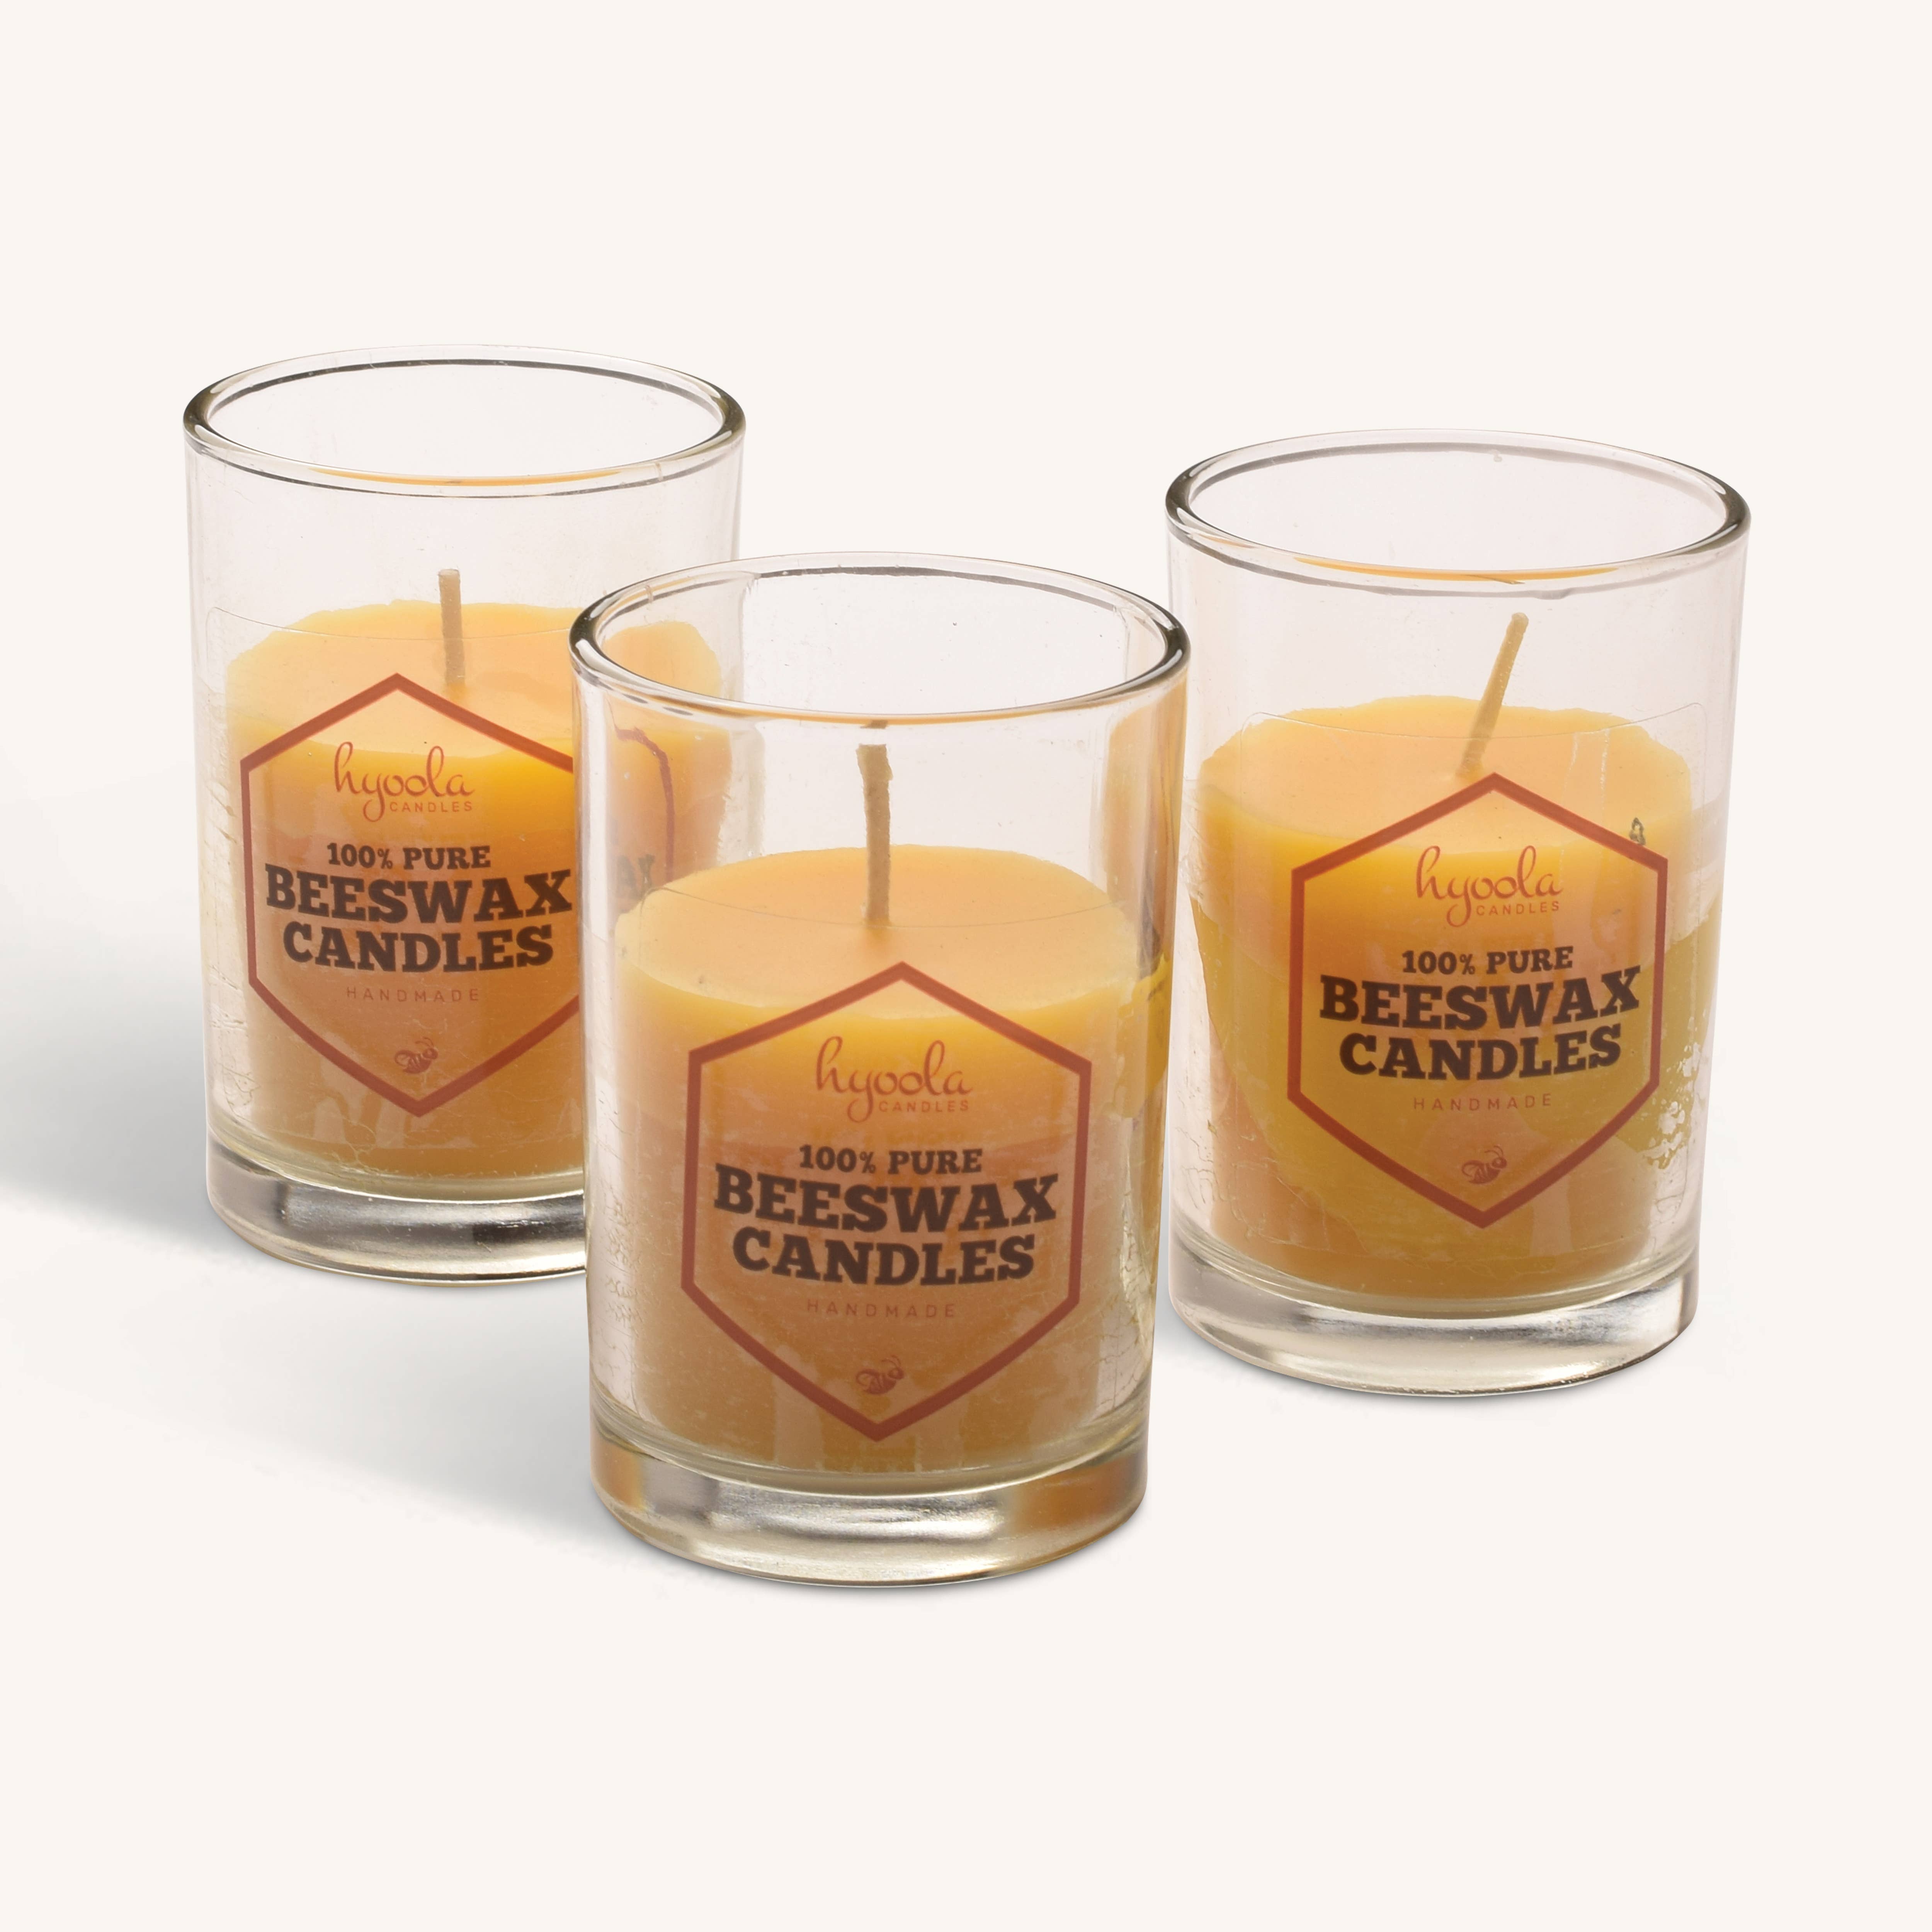 Natural Beeswax Votive Candle in Glass - 2 oz. - 6 Pack